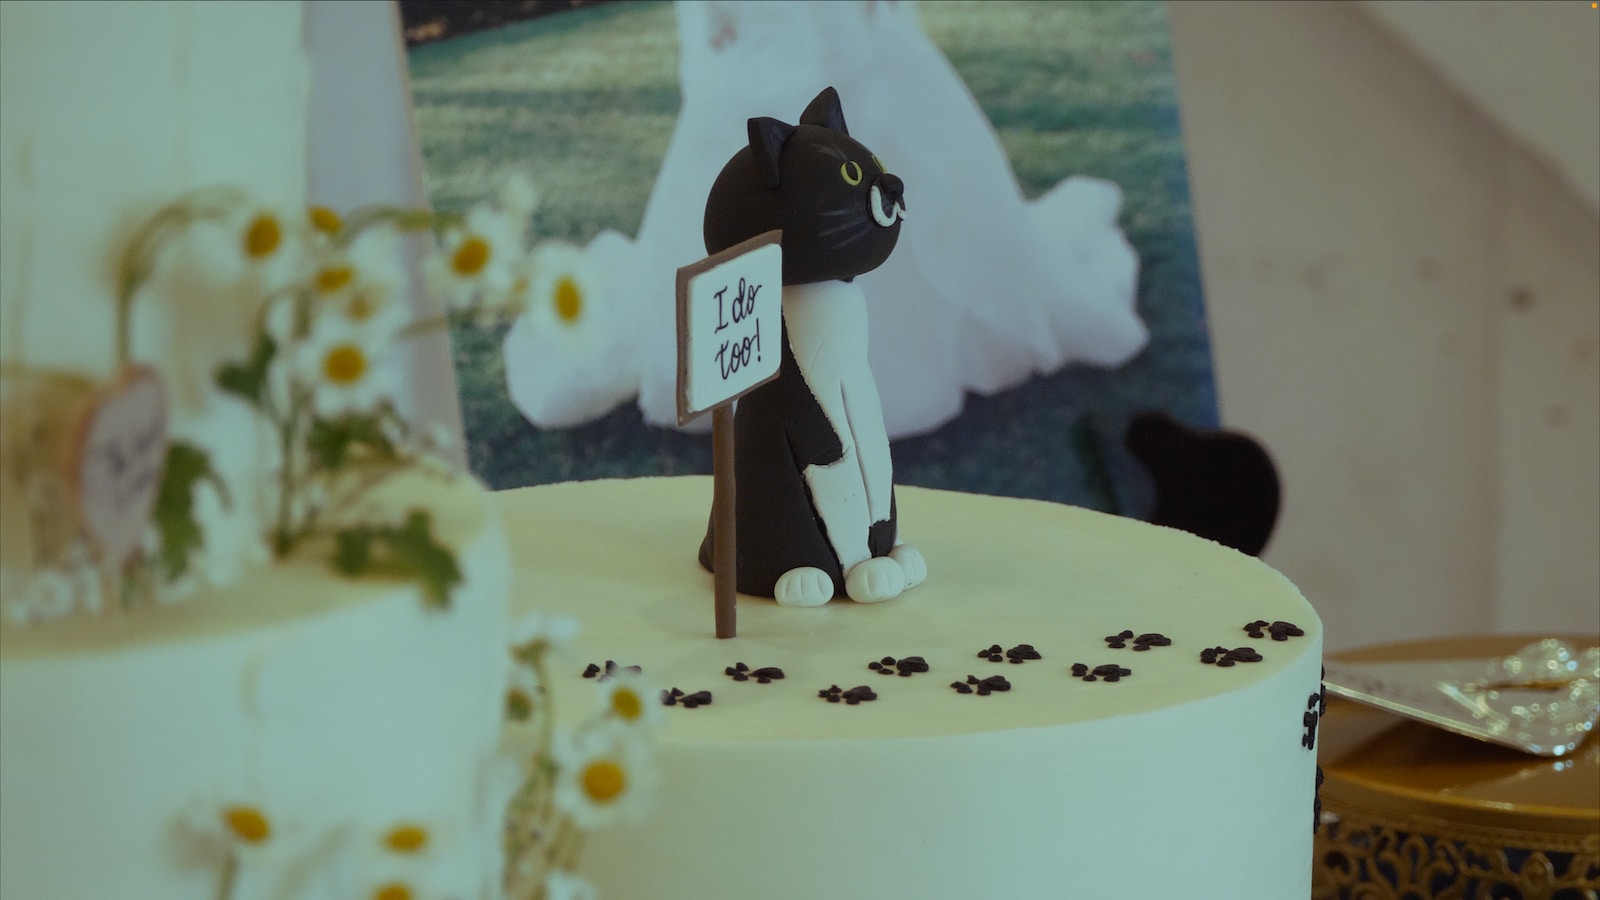 a black and white cat figurine sitting on top of a cake